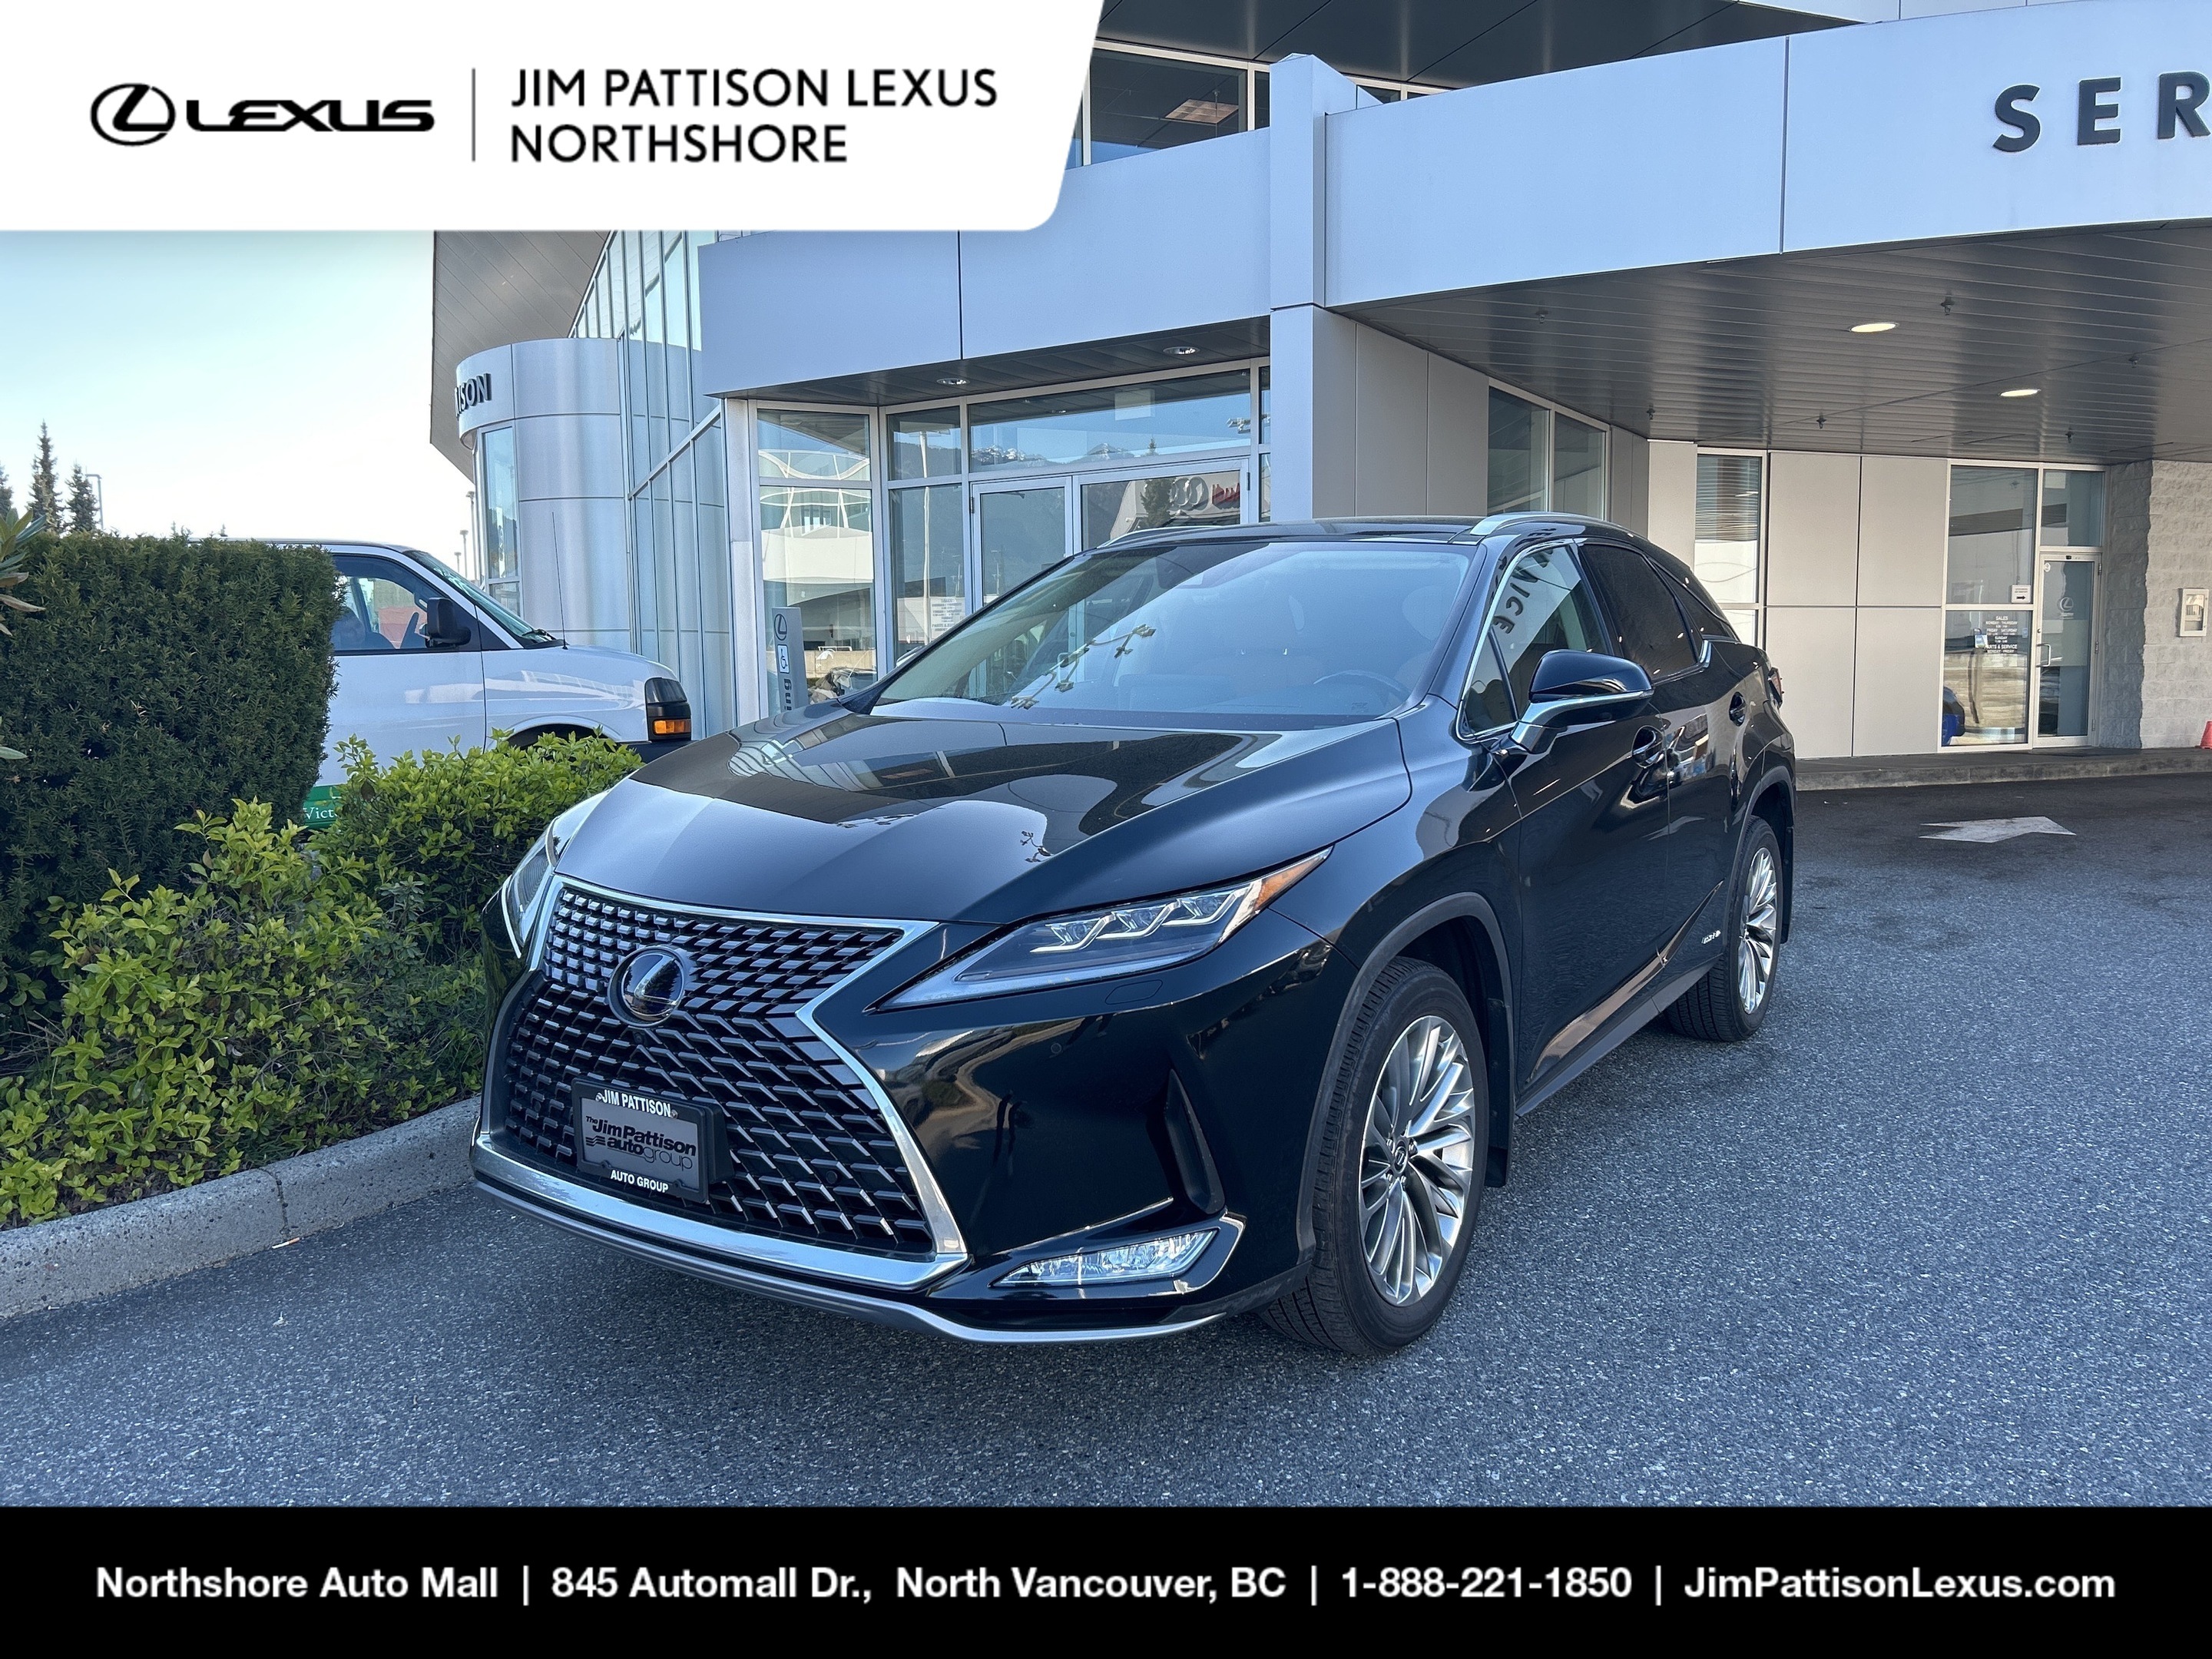 2021 Lexus RX RX 450h AWD / Executive Package / One Owner / Loca